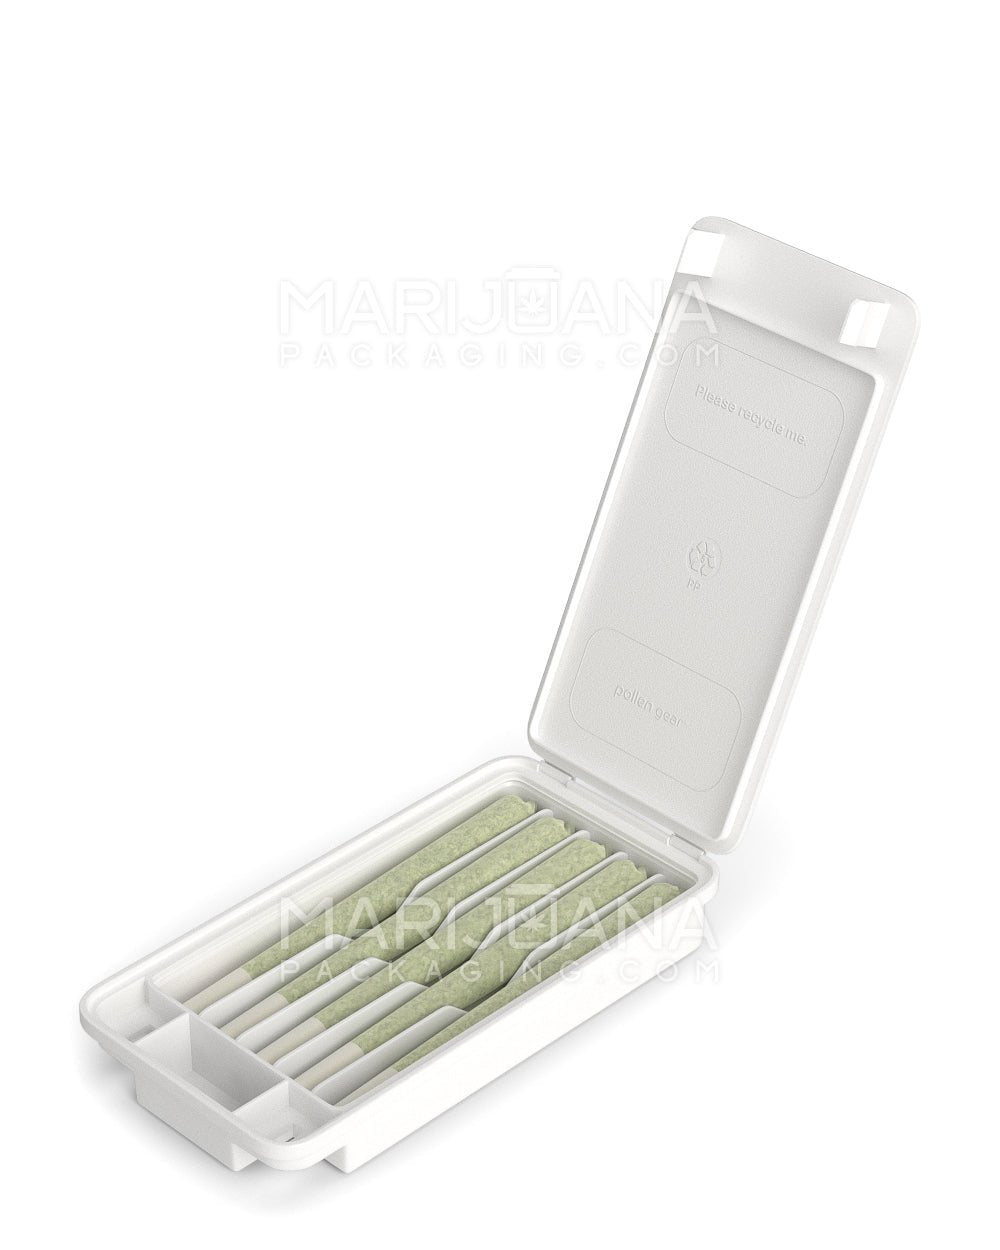 POLLEN GEAR | SnapTech Large White Plastic Insert Tray | 25mm - Foam - 2500 Count - 7